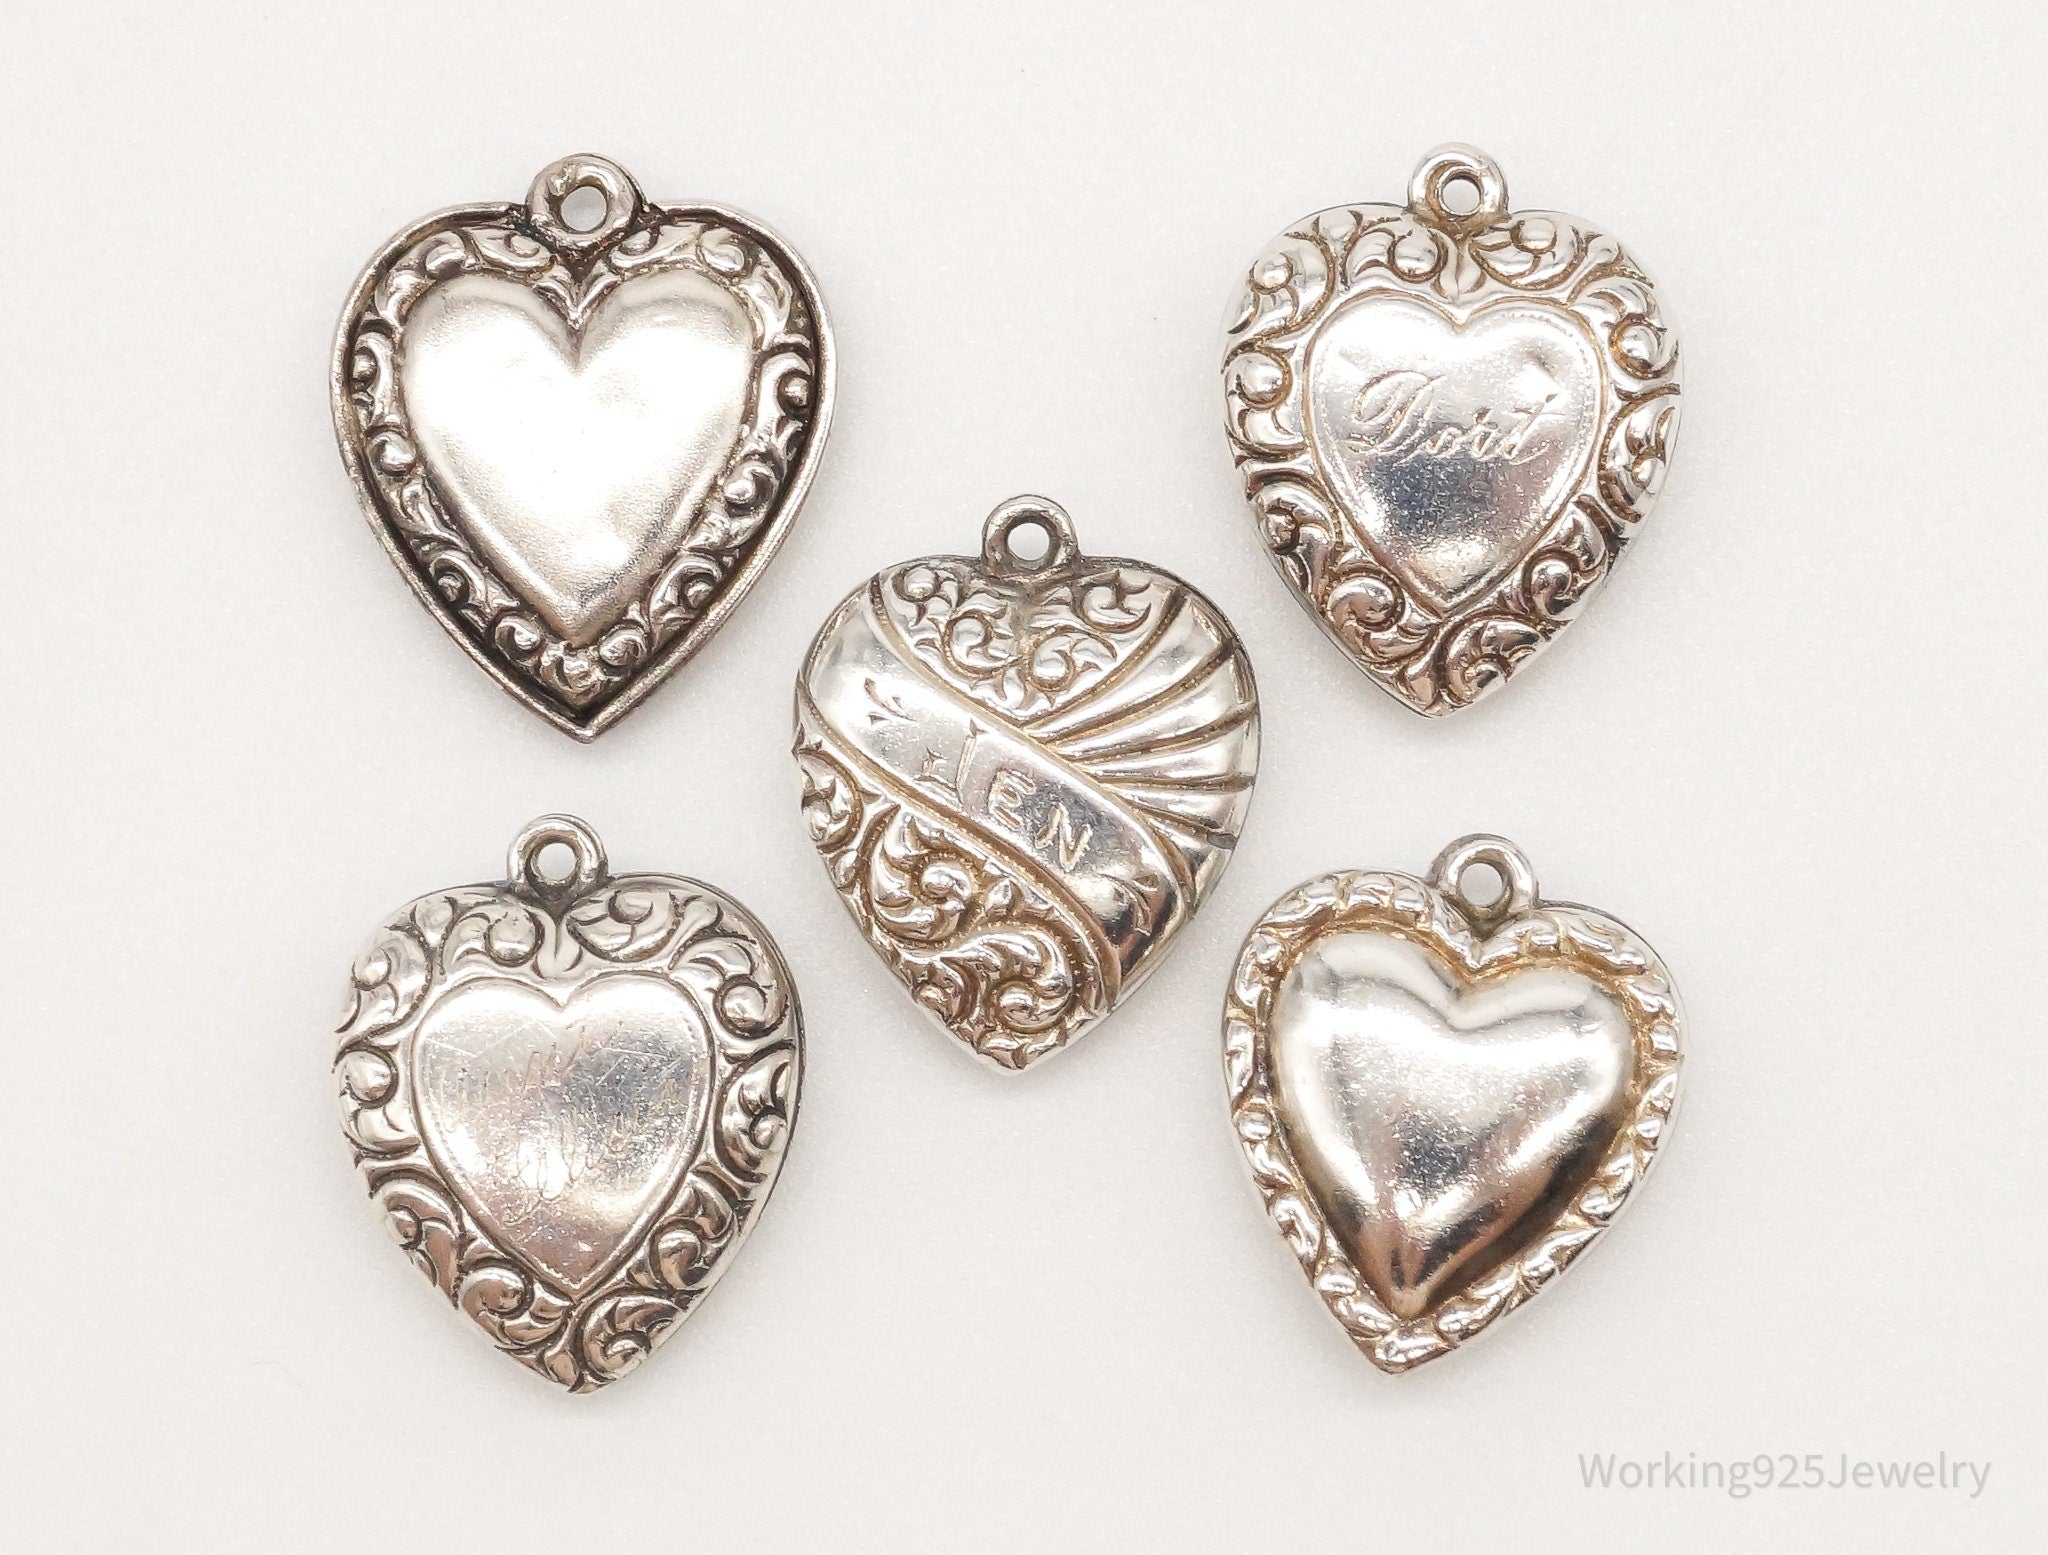 Vintage Puffy Hearts Sterling Silver Charms Lot